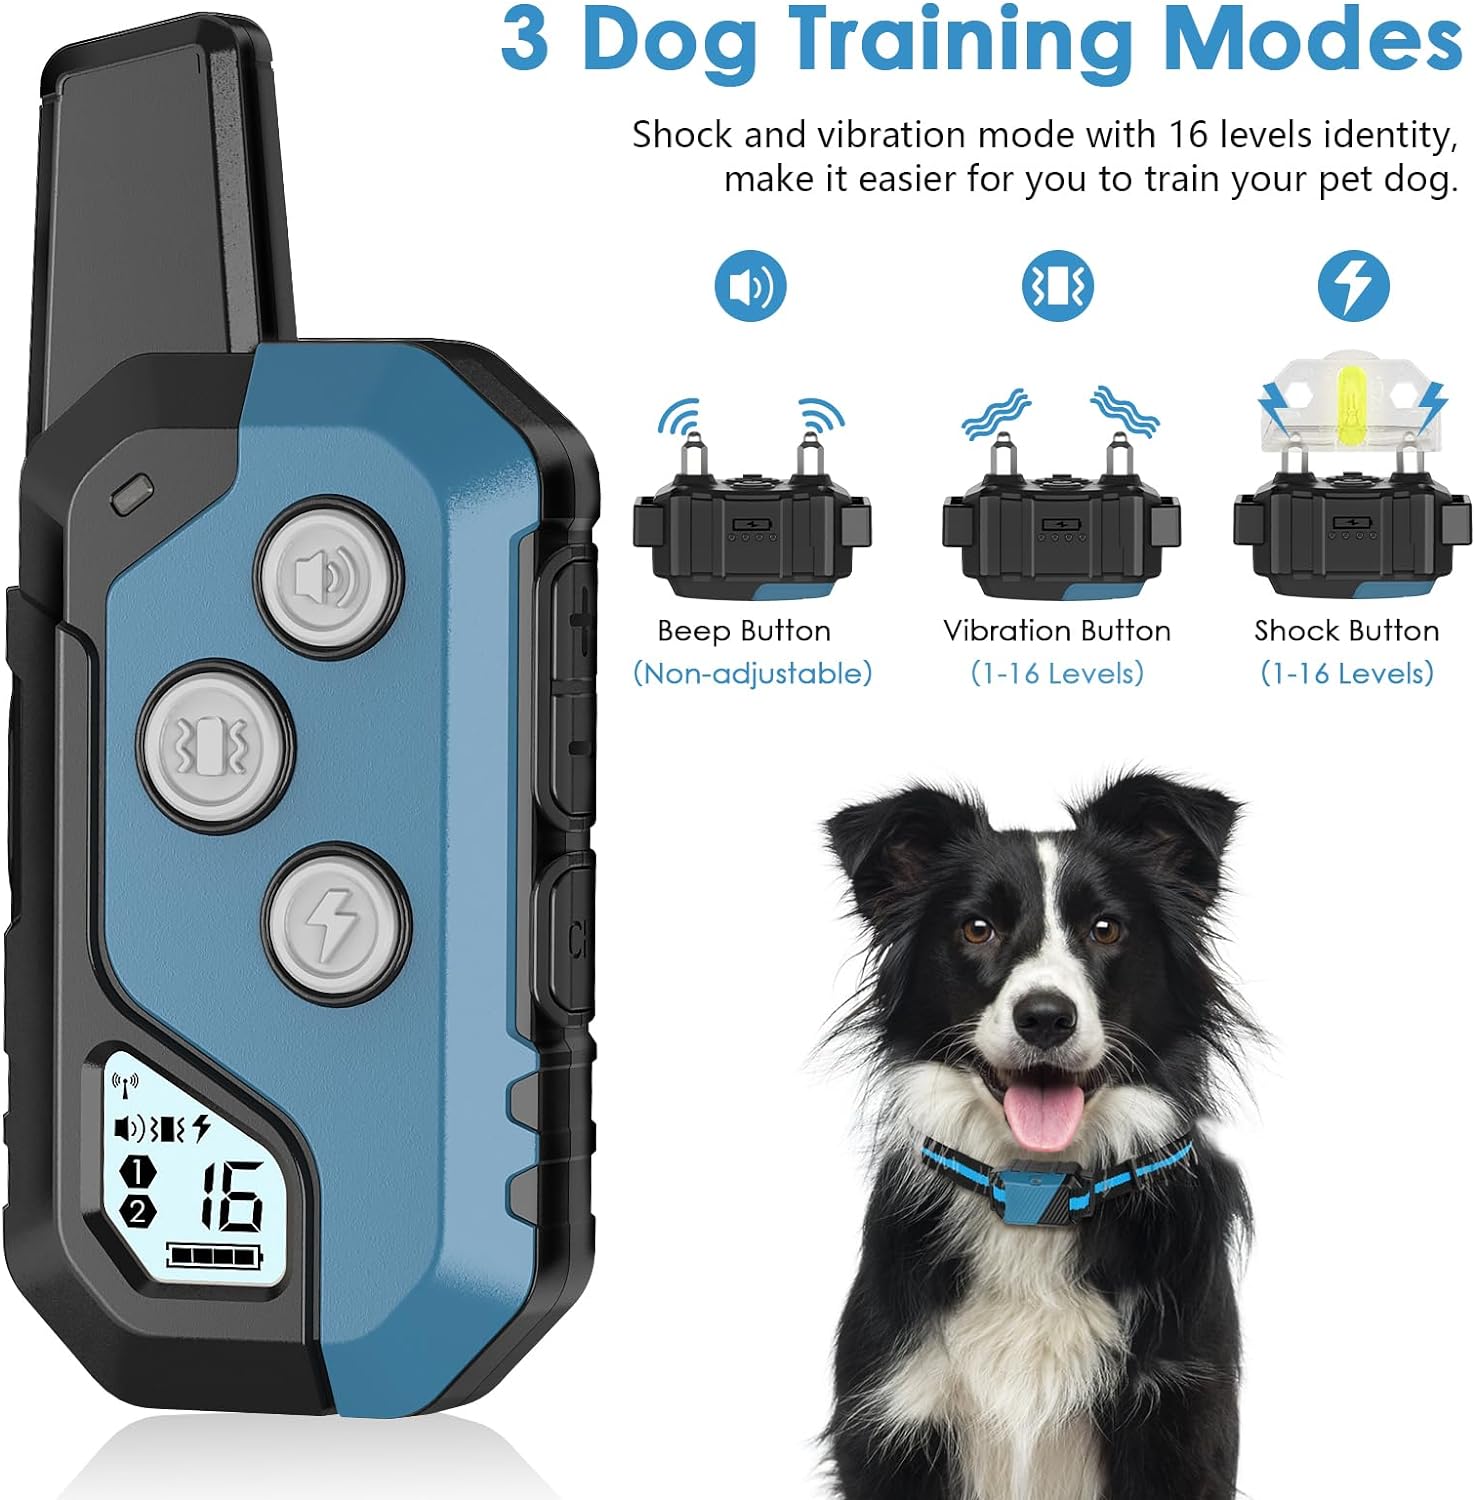 PIOUNS Dog Shock Collar, IP67 Waterproof Dog Training Collar with Remote, 3 Training Modes, Shock, Vibration and Beep, Rechargeable Electric Shock Collar for Large Medium Small Dog